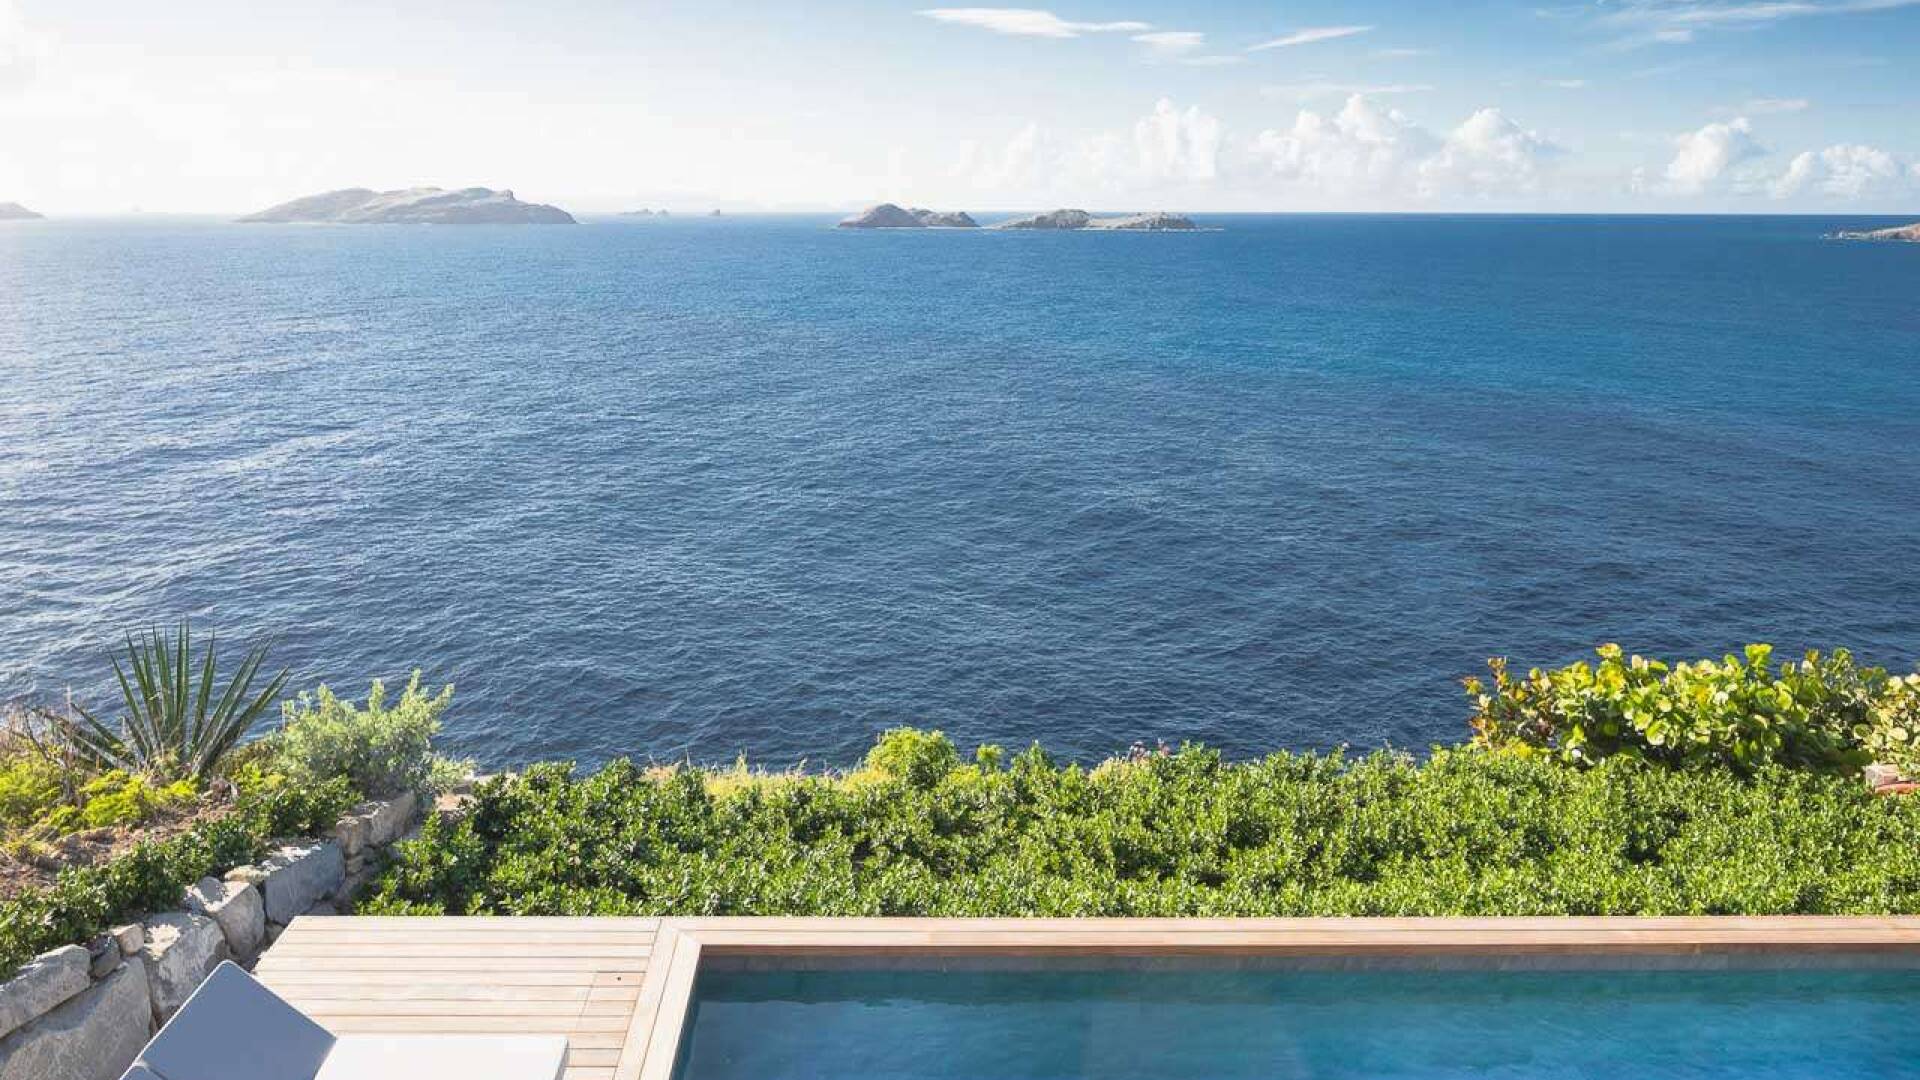 The view from WV CEO, Pointe Milou, St. Barthelemy